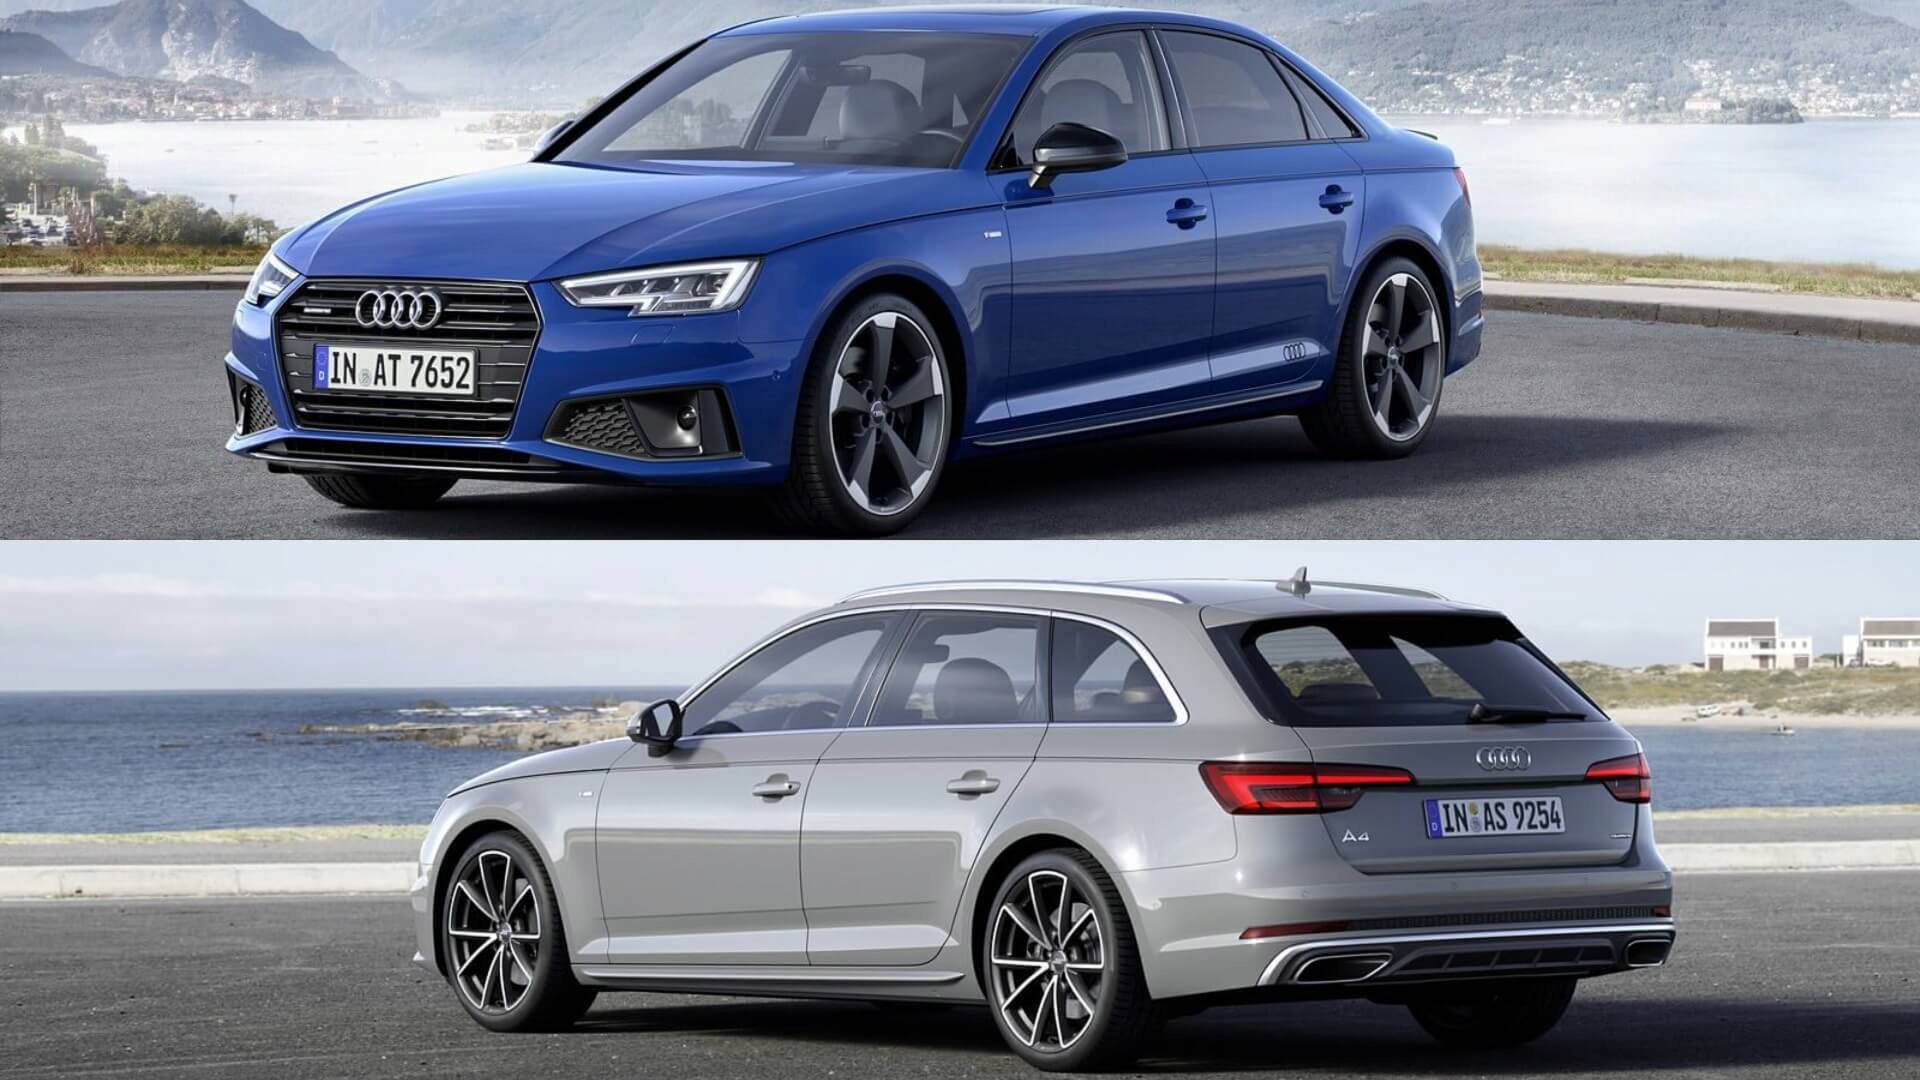 Audi A4 Saloon, Avant unveiled in Europe with discreet changes